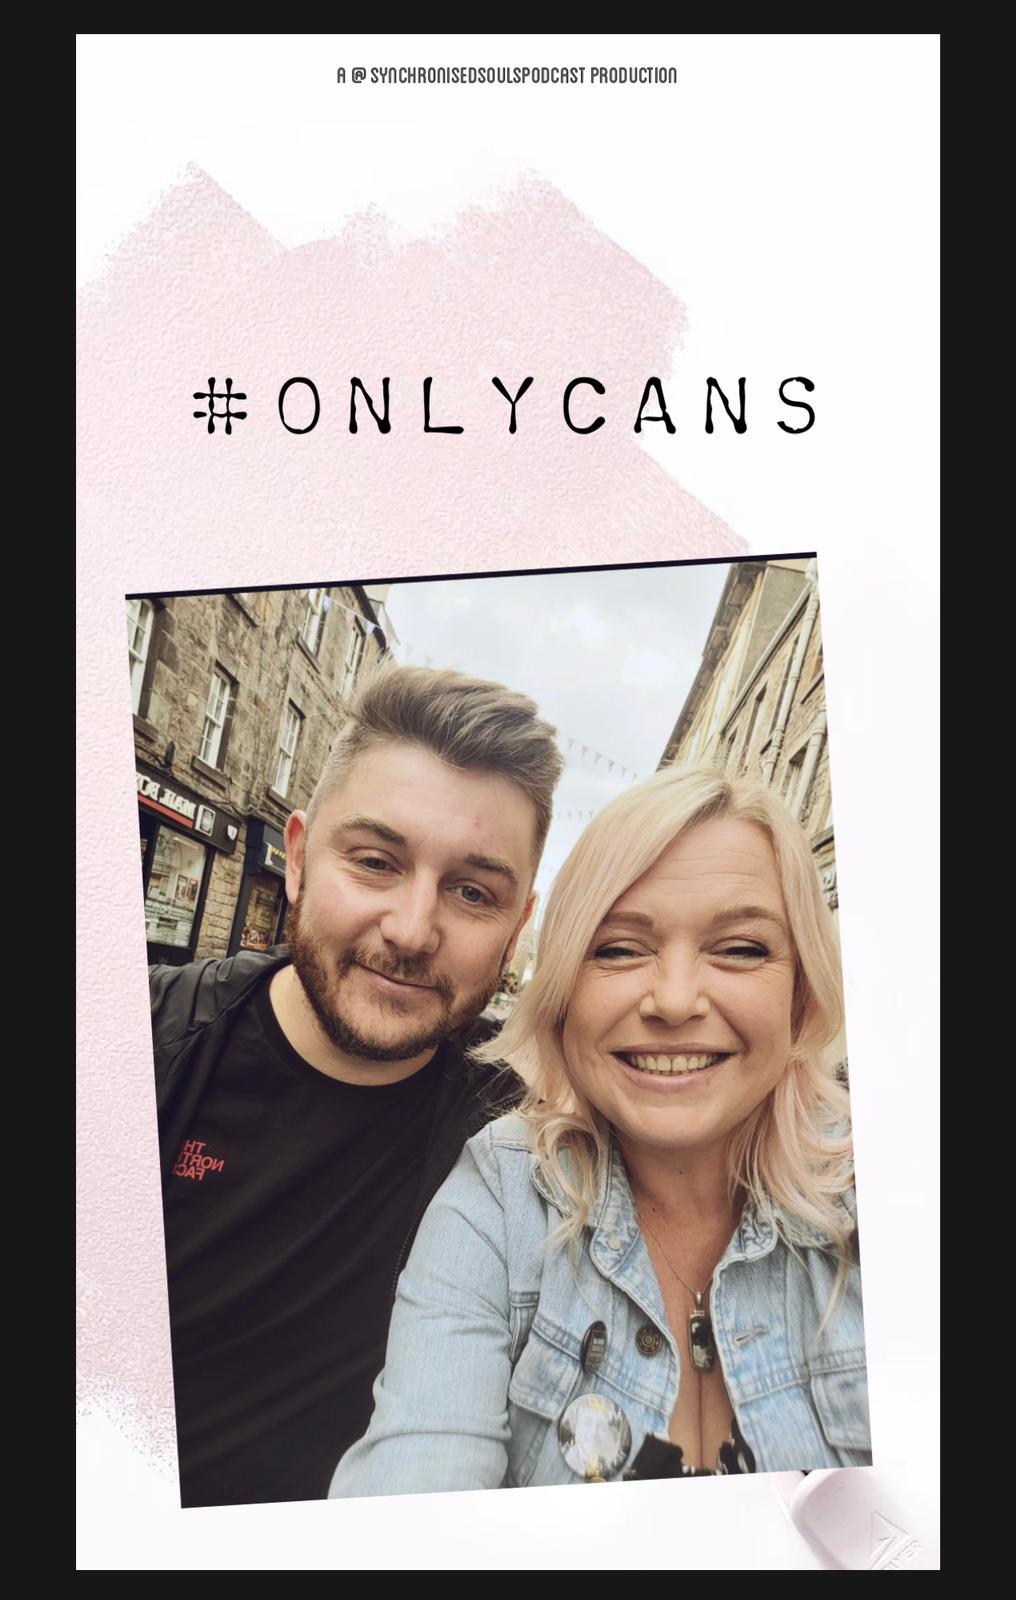 Onlycans